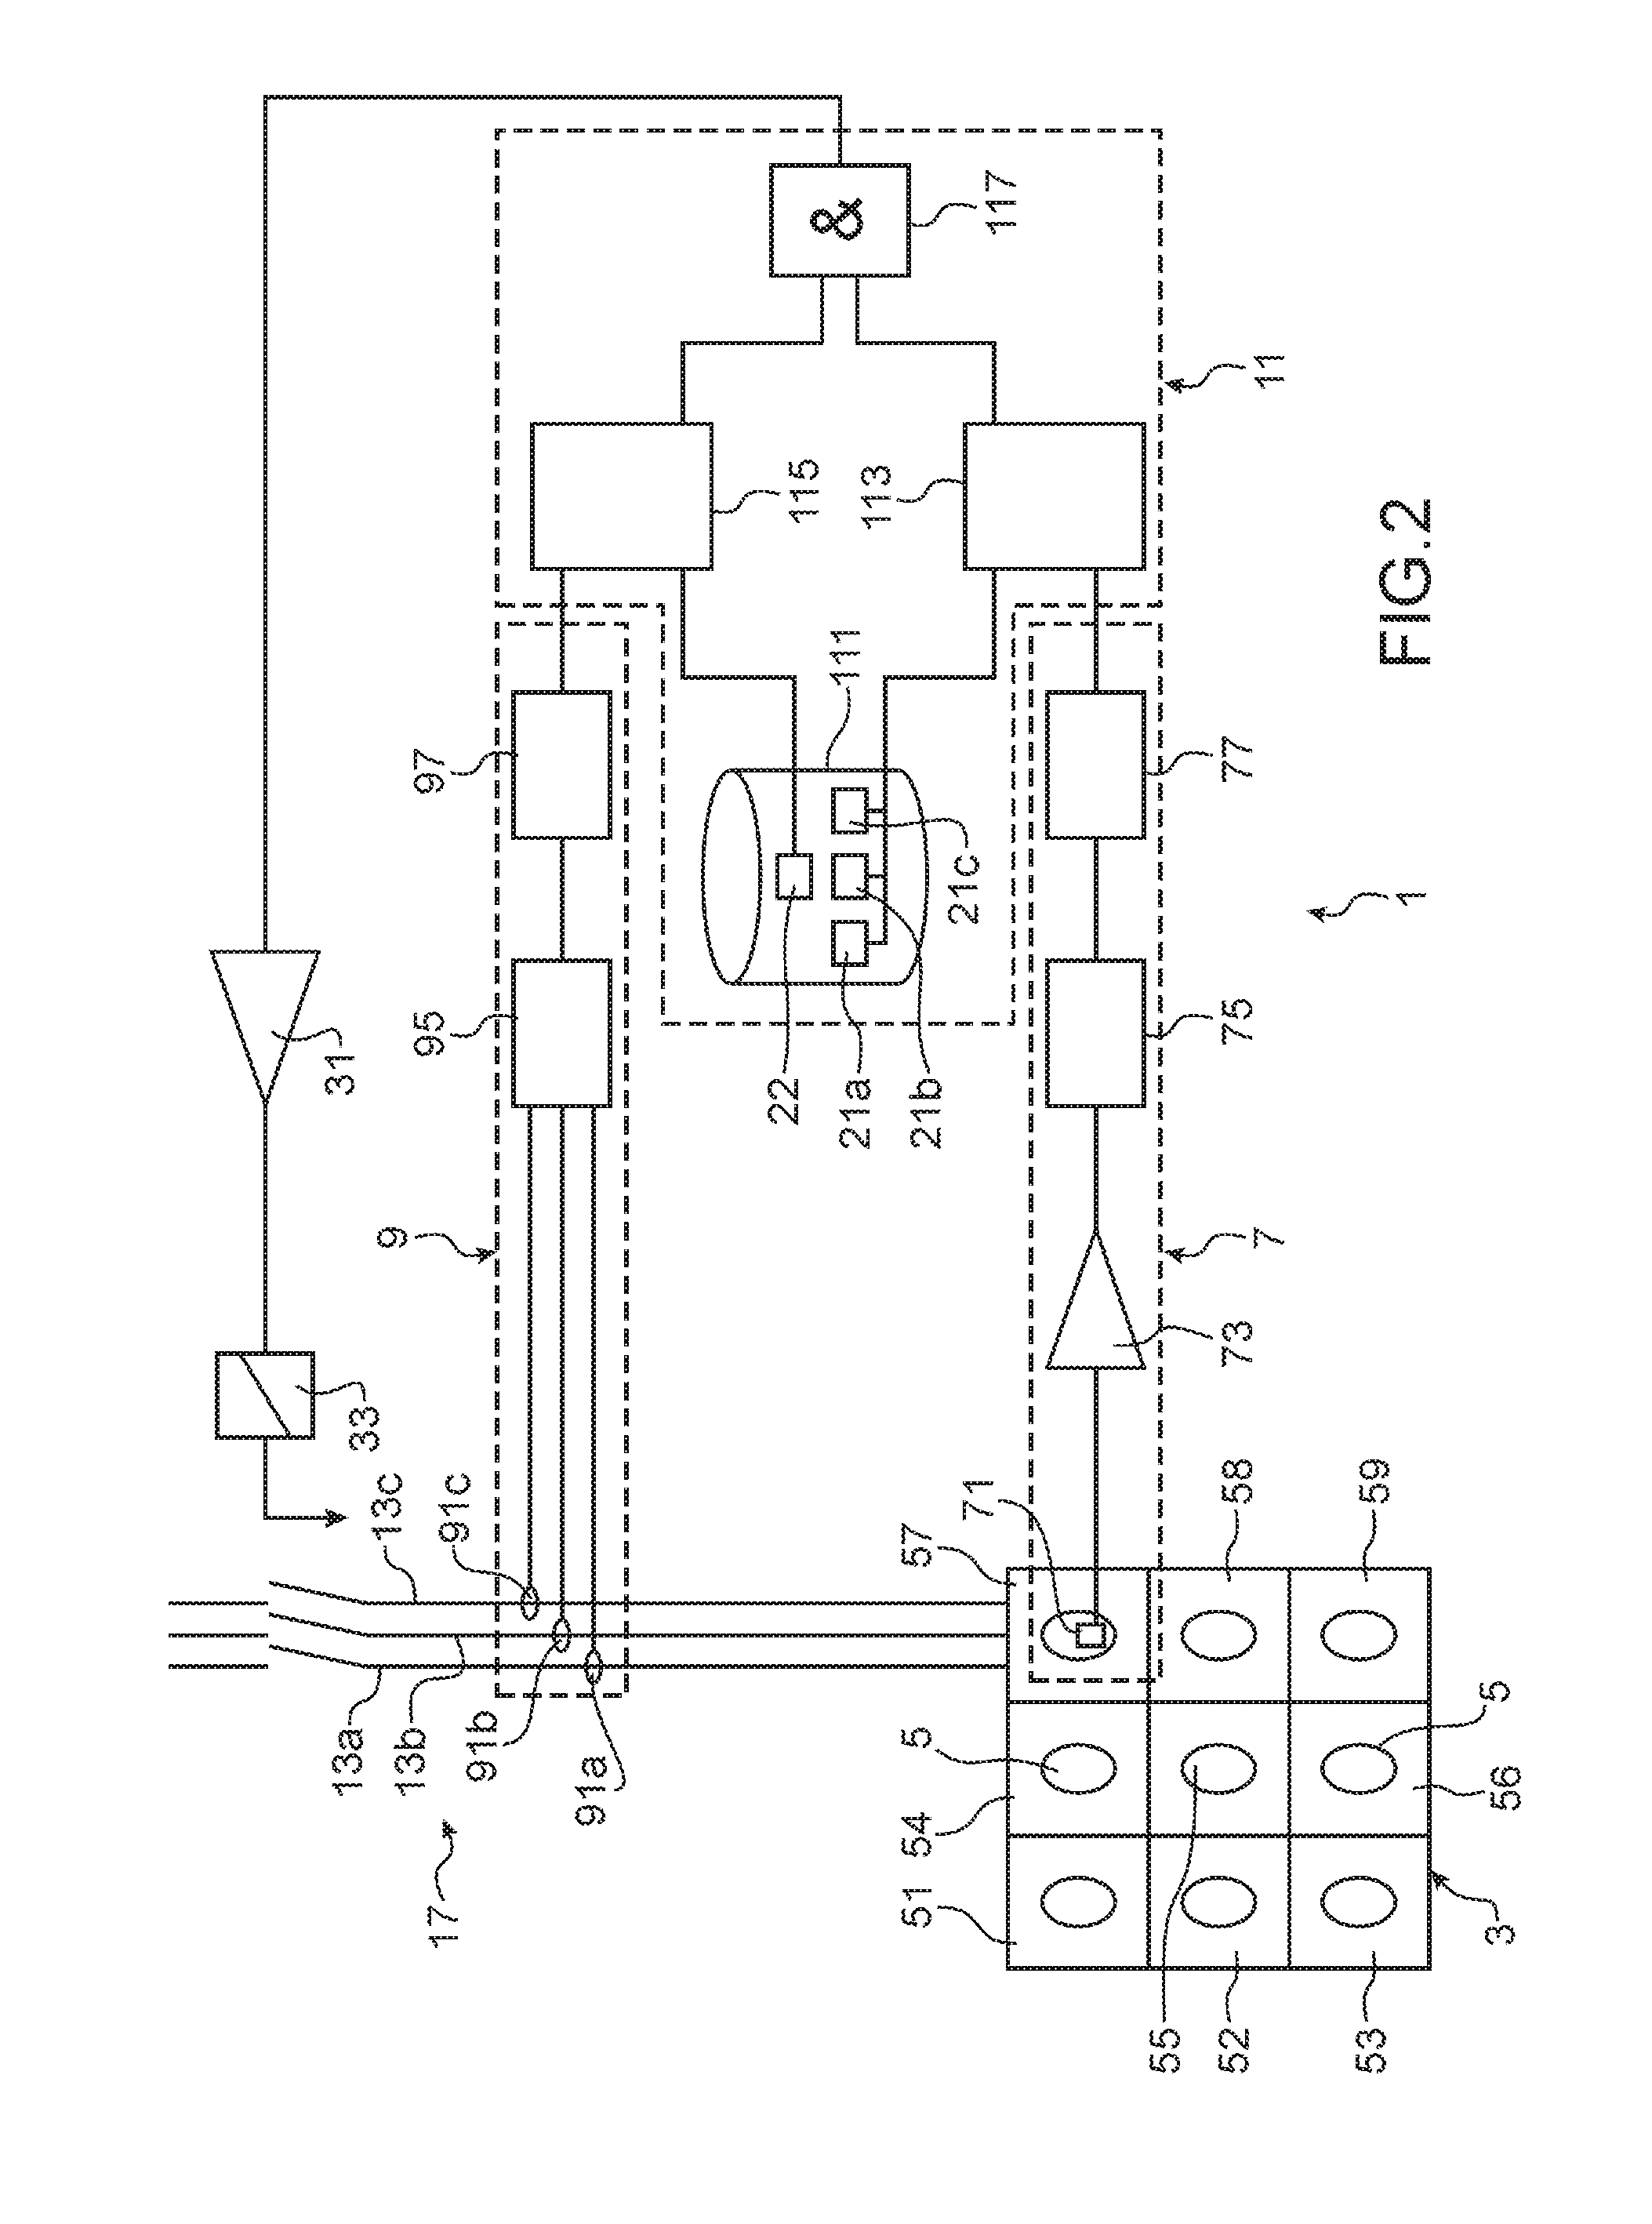 Method and system of detection and passivation of an electric arc